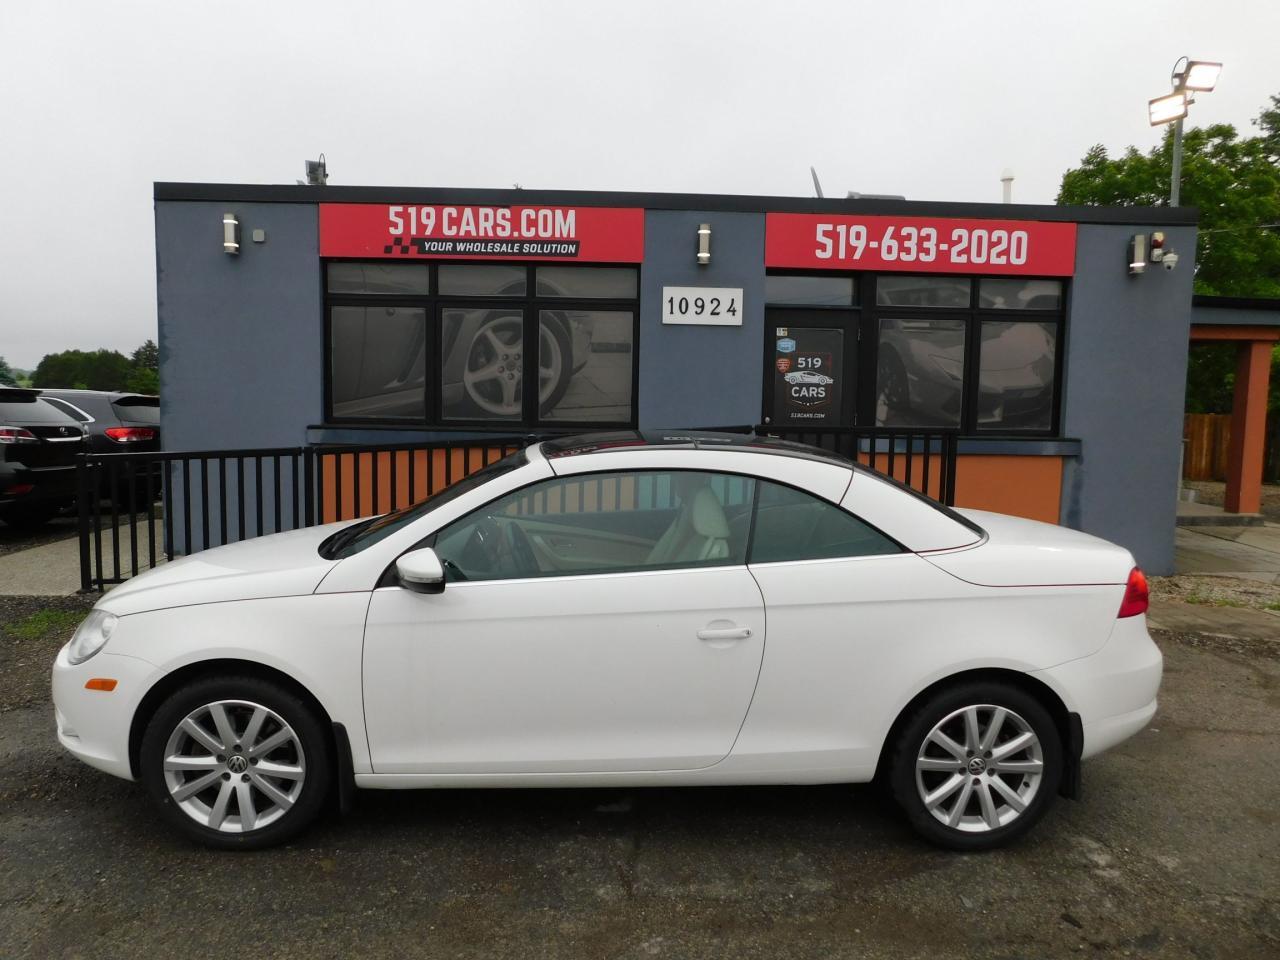 2011 Volkswagen Eos | Convertible | Leather | Sunroof | New Tires